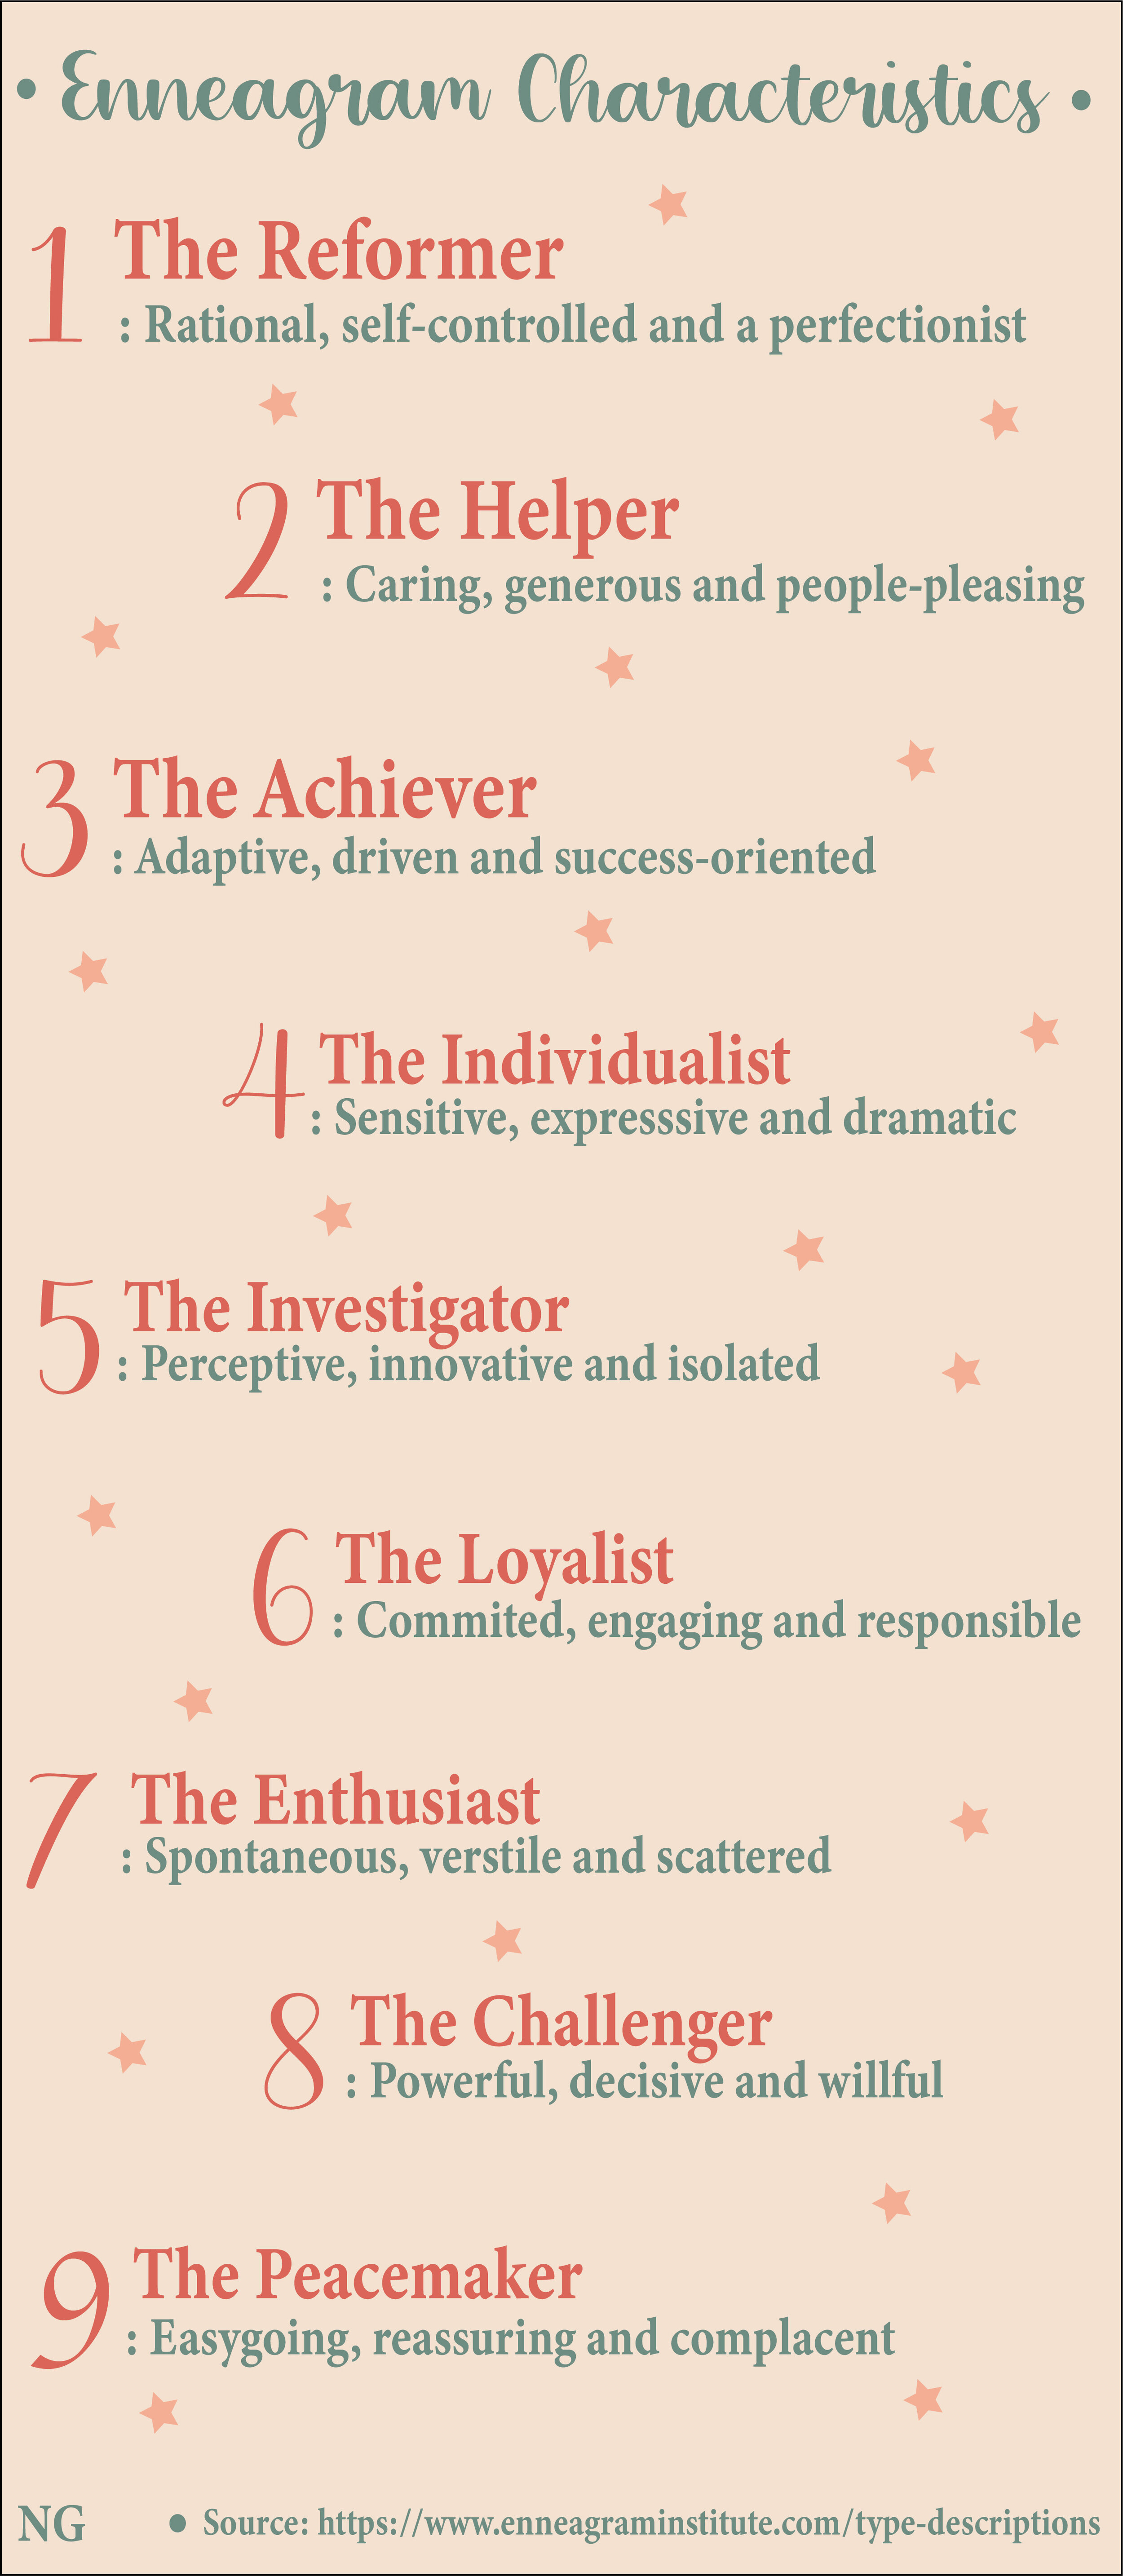 Which enneagram are you? Take a look at these characteristics to see which number you identify best with.